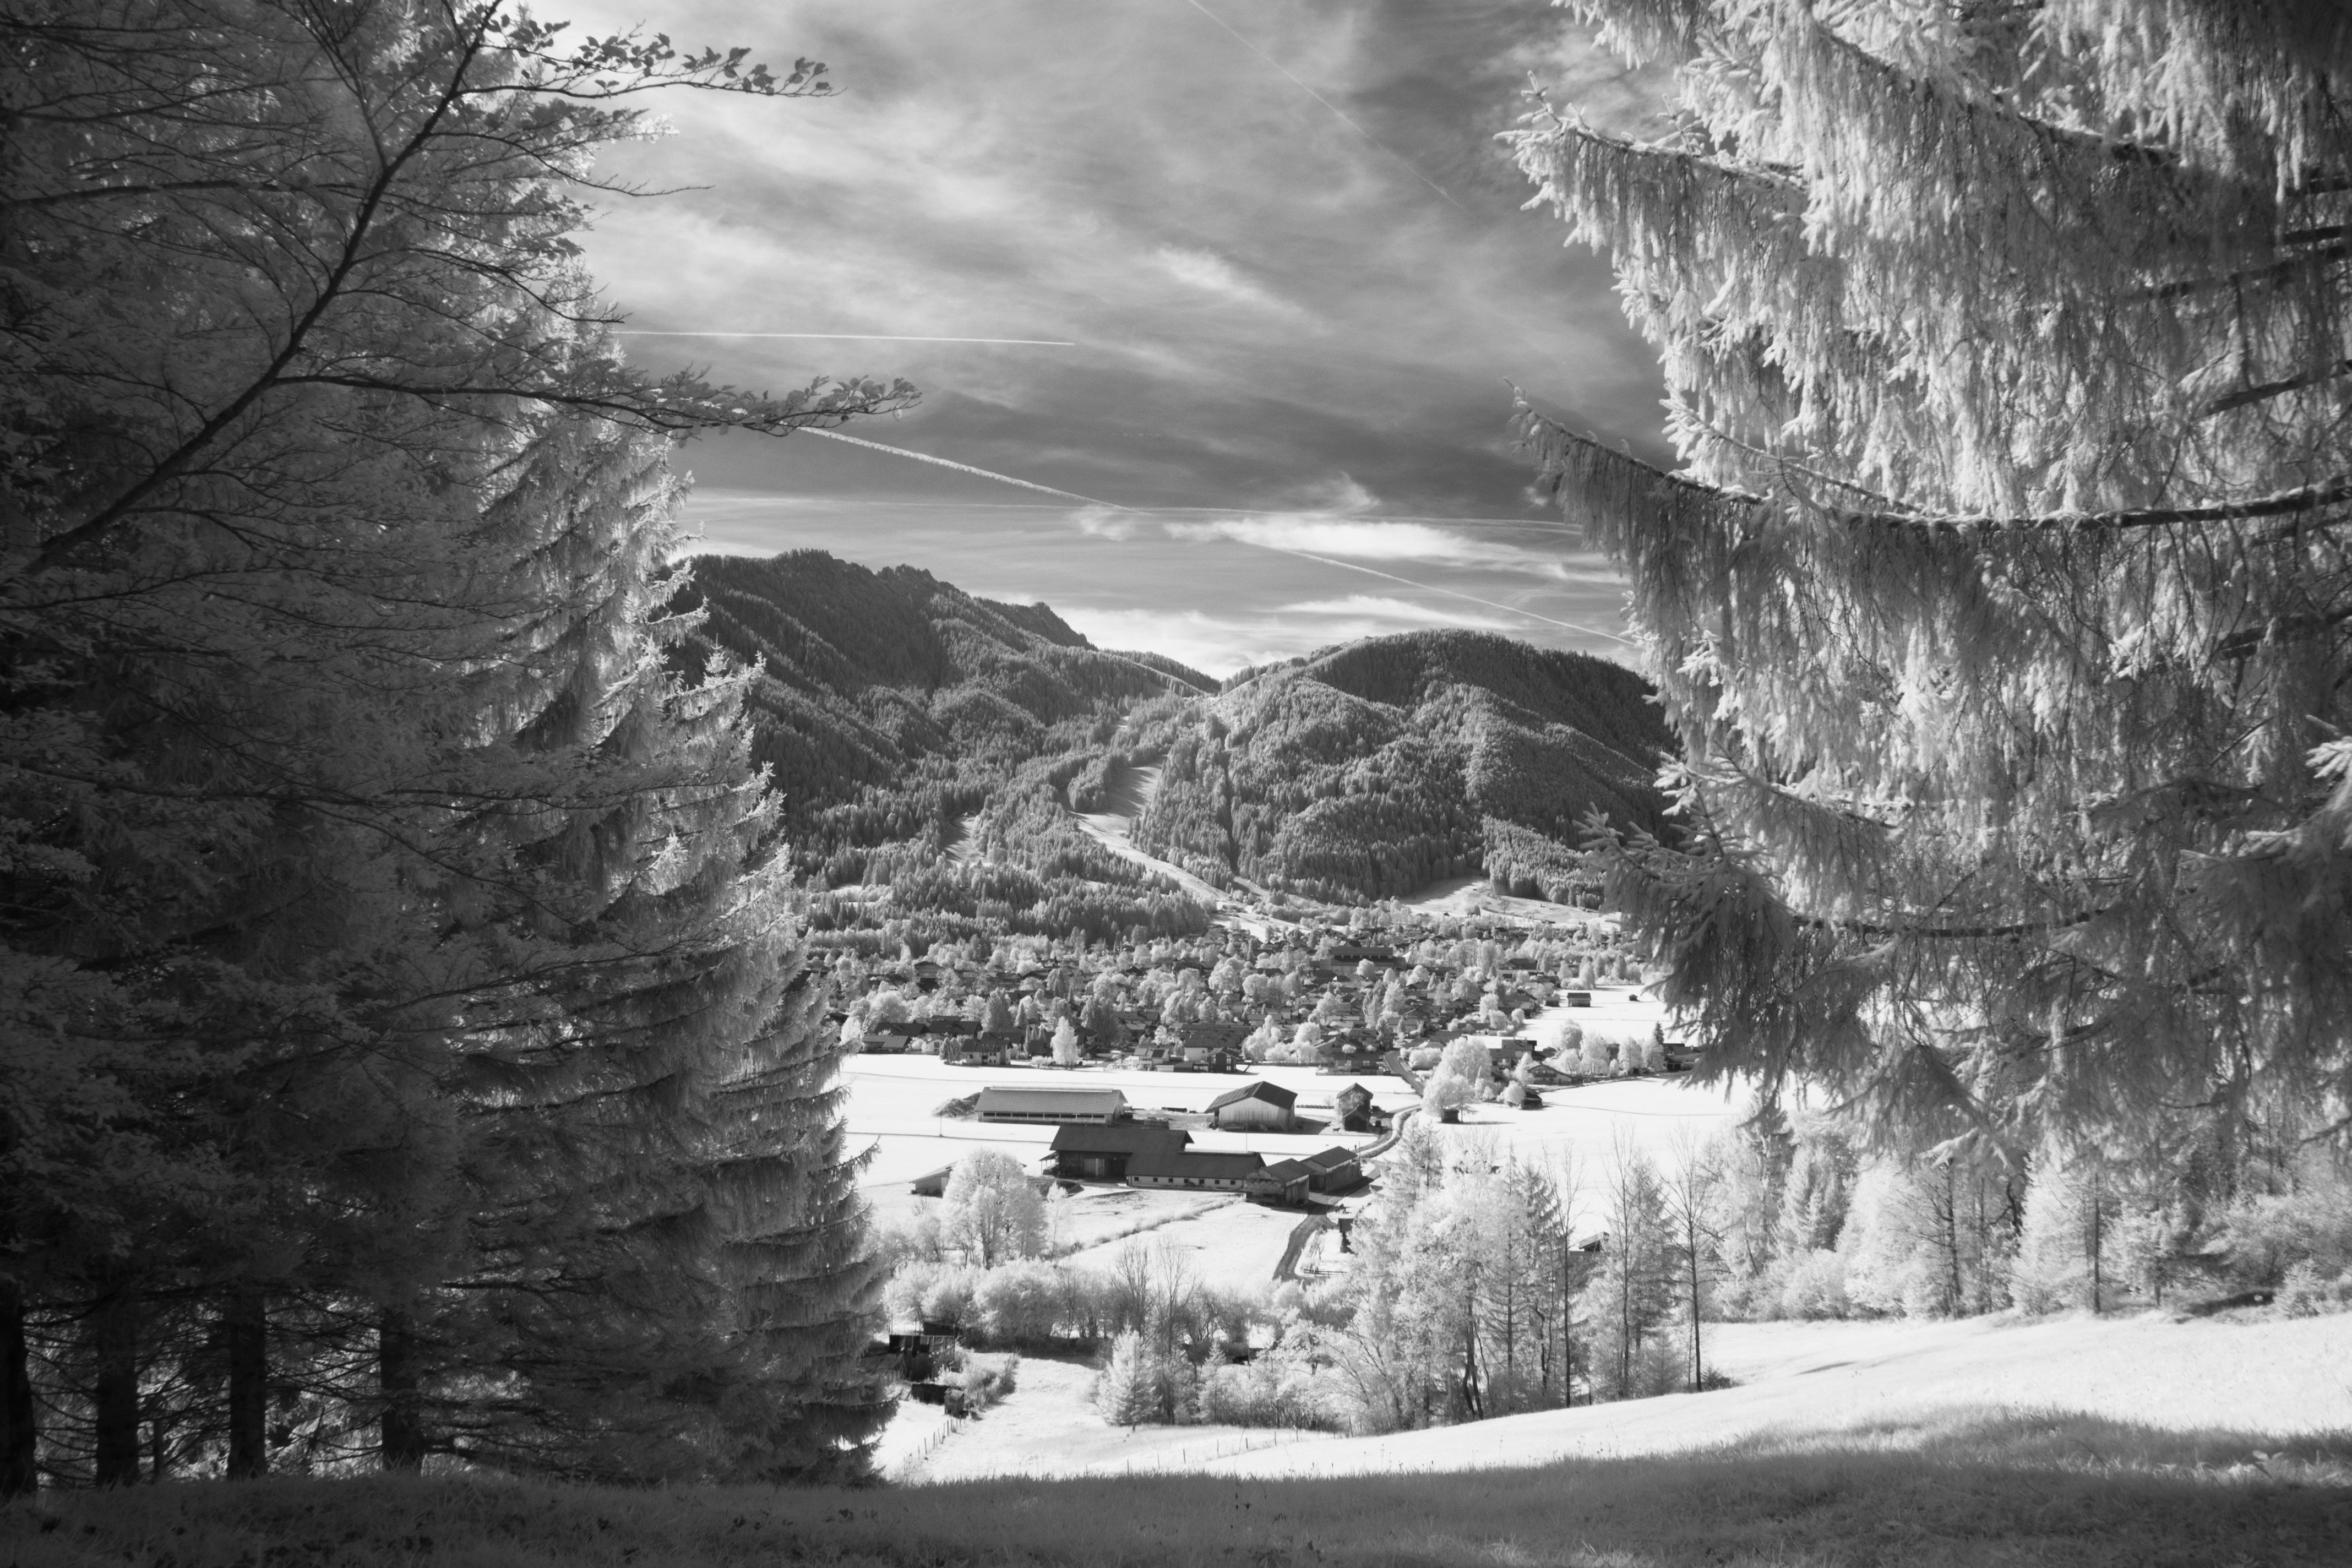 The beautiful nature around Oberammergau ..... with my infra red camera I can make the most beautiful pictures. It is also a great hobby to do on holiday.